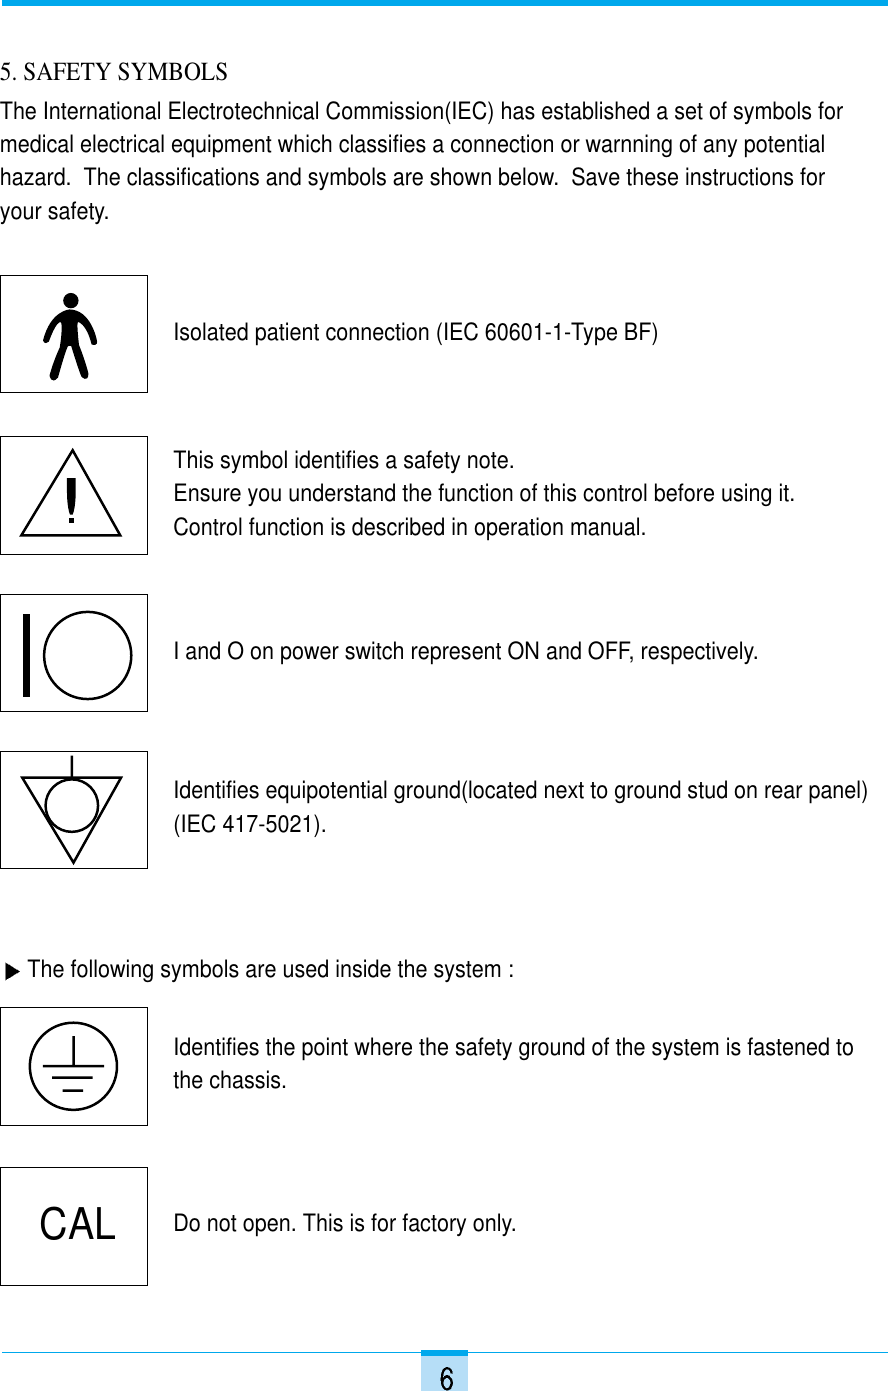 5. SAFETY SYMBOLSThe International Electrotechnical Commission(IEC) has established a set of symbols formedical electrical equipment which classifies a connection or warnning of any potentialhazard.  The classifications and symbols are shown below.  Save these instructions for your safety.The following symbols are used inside the system : Isolated patient connection (IEC 60601-1-Type BF)This symbol identifies a safety note.Ensure you understand the function of this control before using it. Control function is described in operation manual.I and O on power switch represent ON and OFF, respectively.Identifies equipotential ground(located next to ground stud on rear panel)(IEC 417-5021).Identifies the point where the safety ground of the system is fastened tothe chassis.Do not open. This is for factory only.CAL